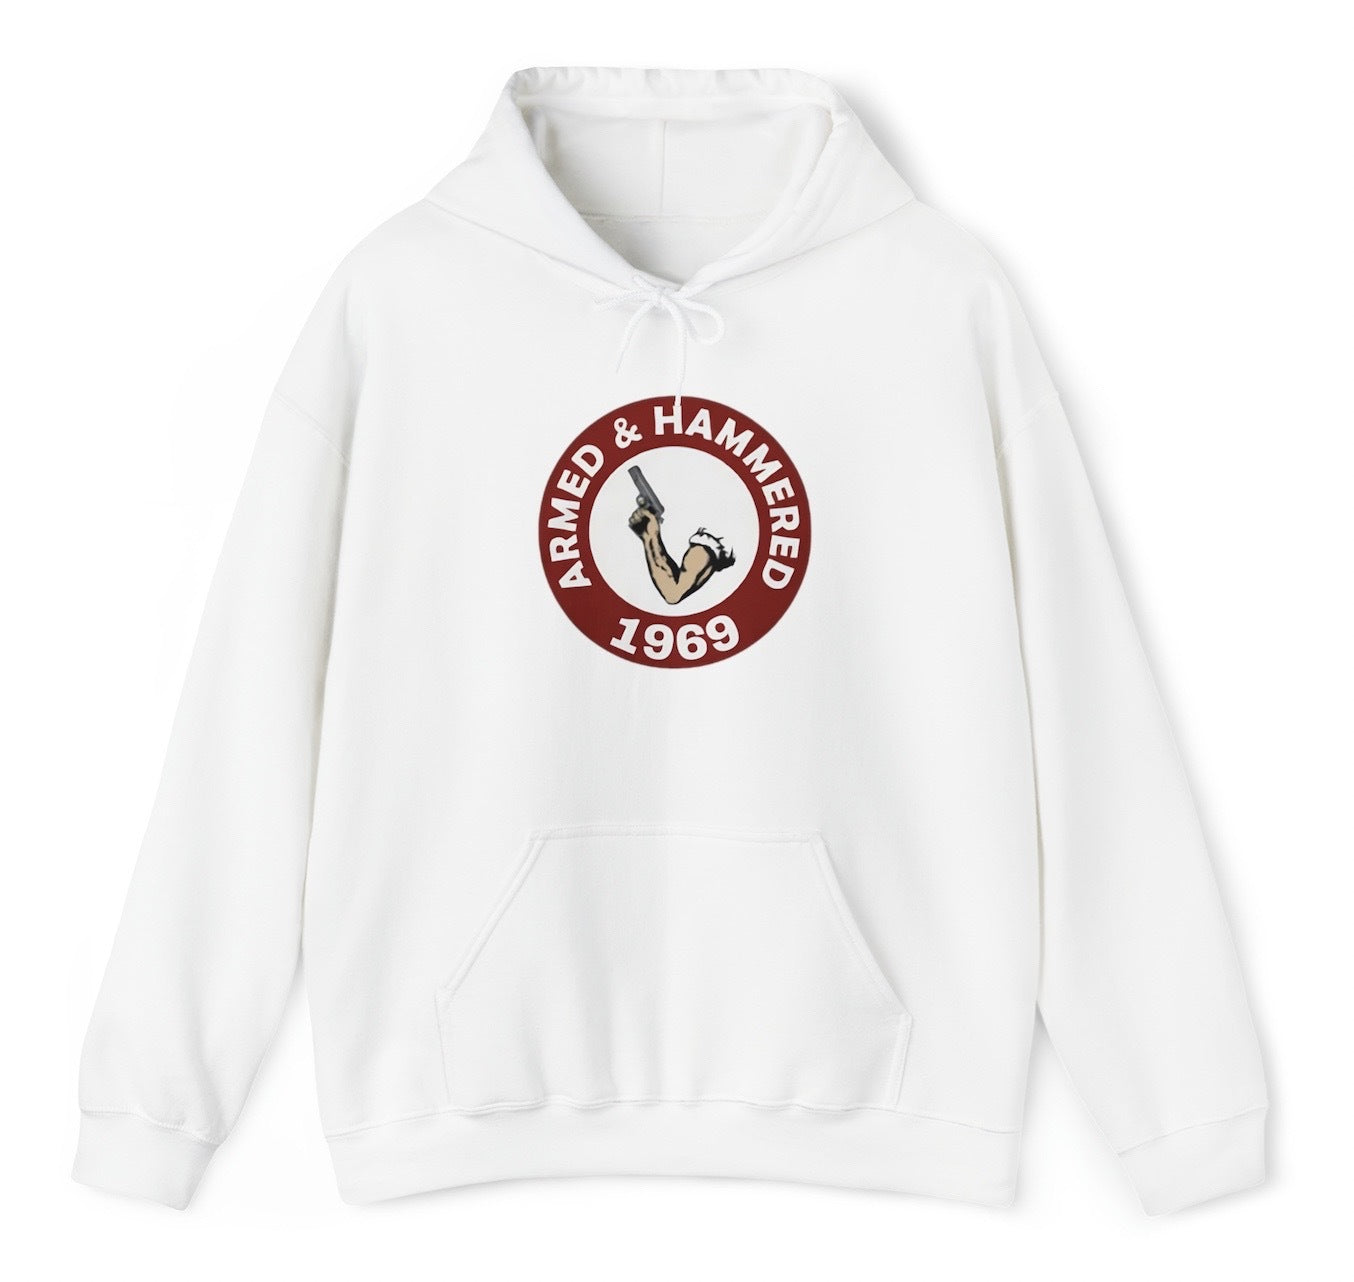 Armed and Hammered 1969 Hoodie